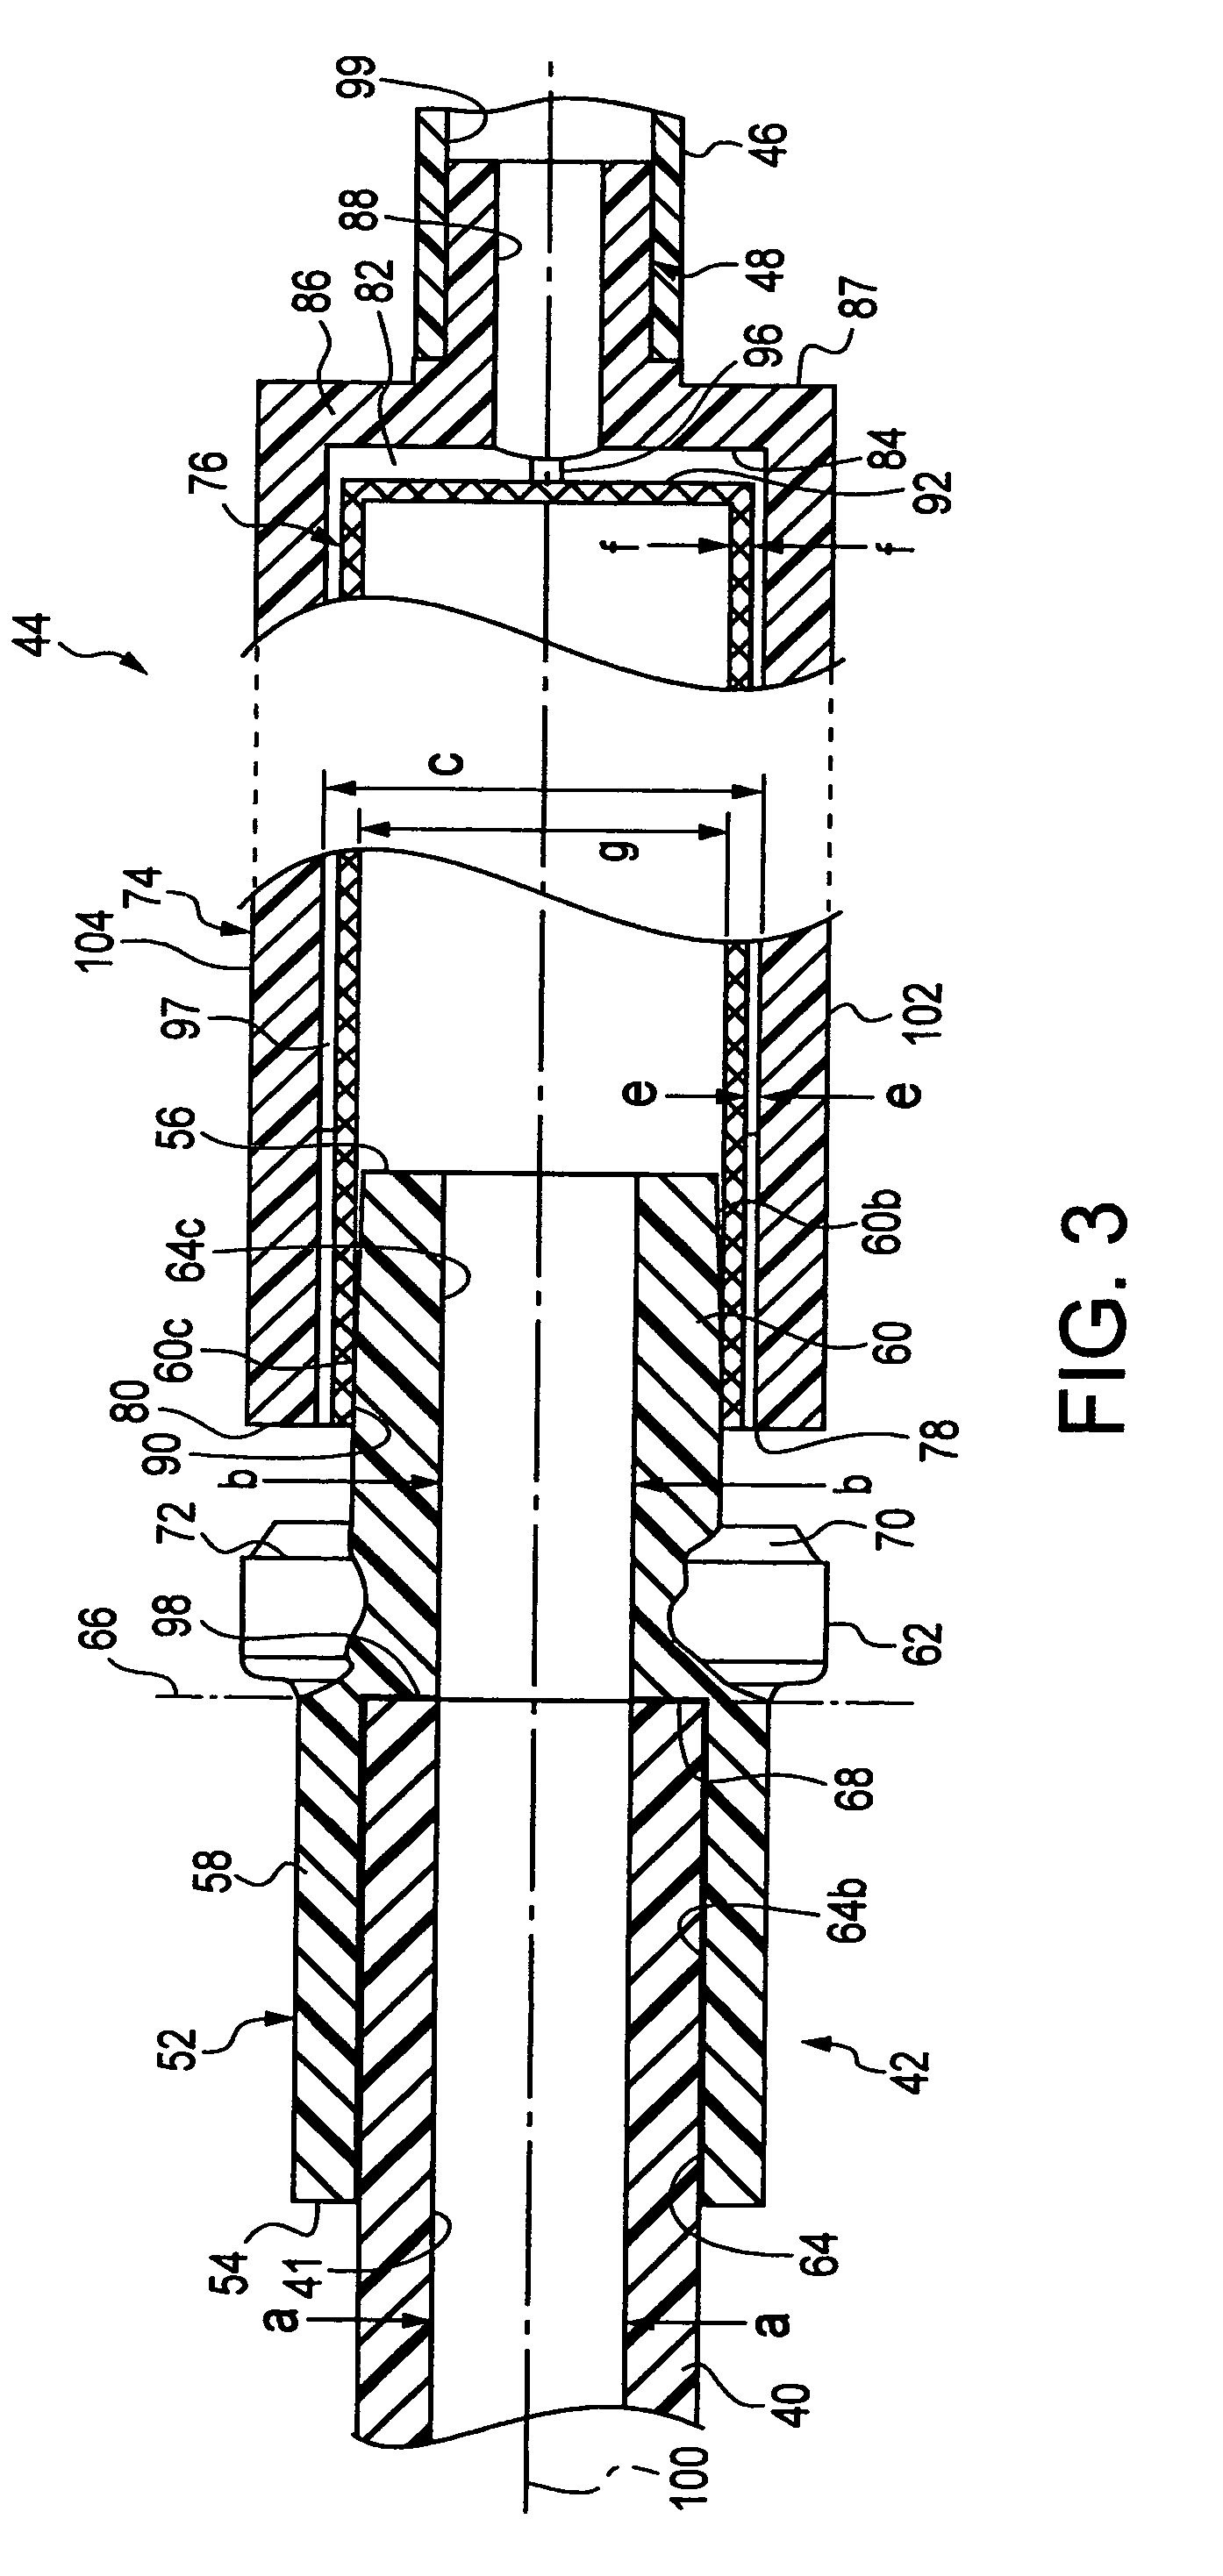 Surgical apparatus and methods asociated therewith